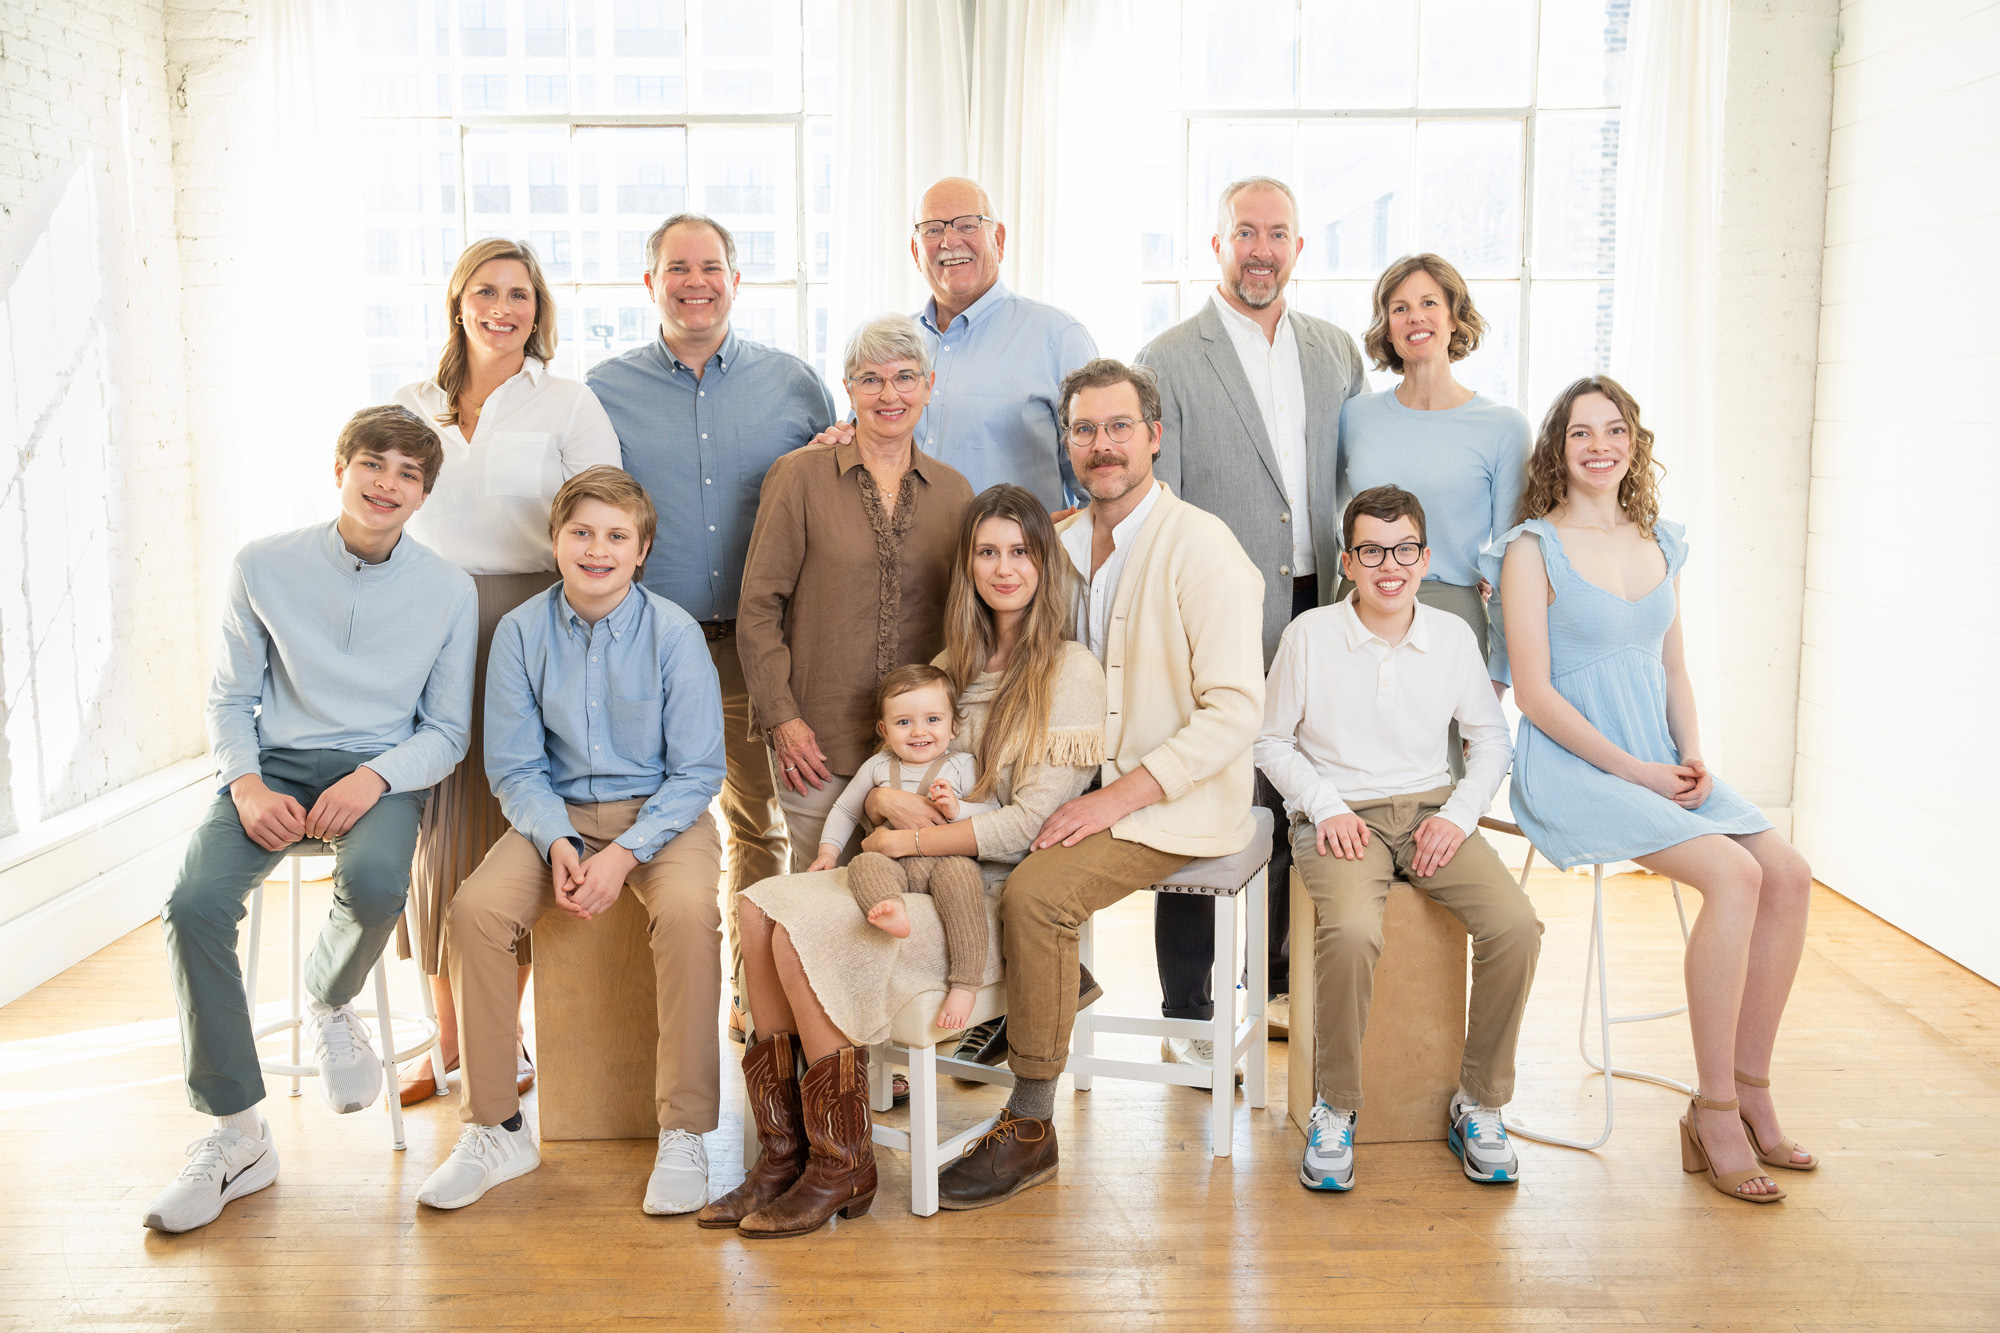 Large extended family wearing blue and neutral tone clothing.